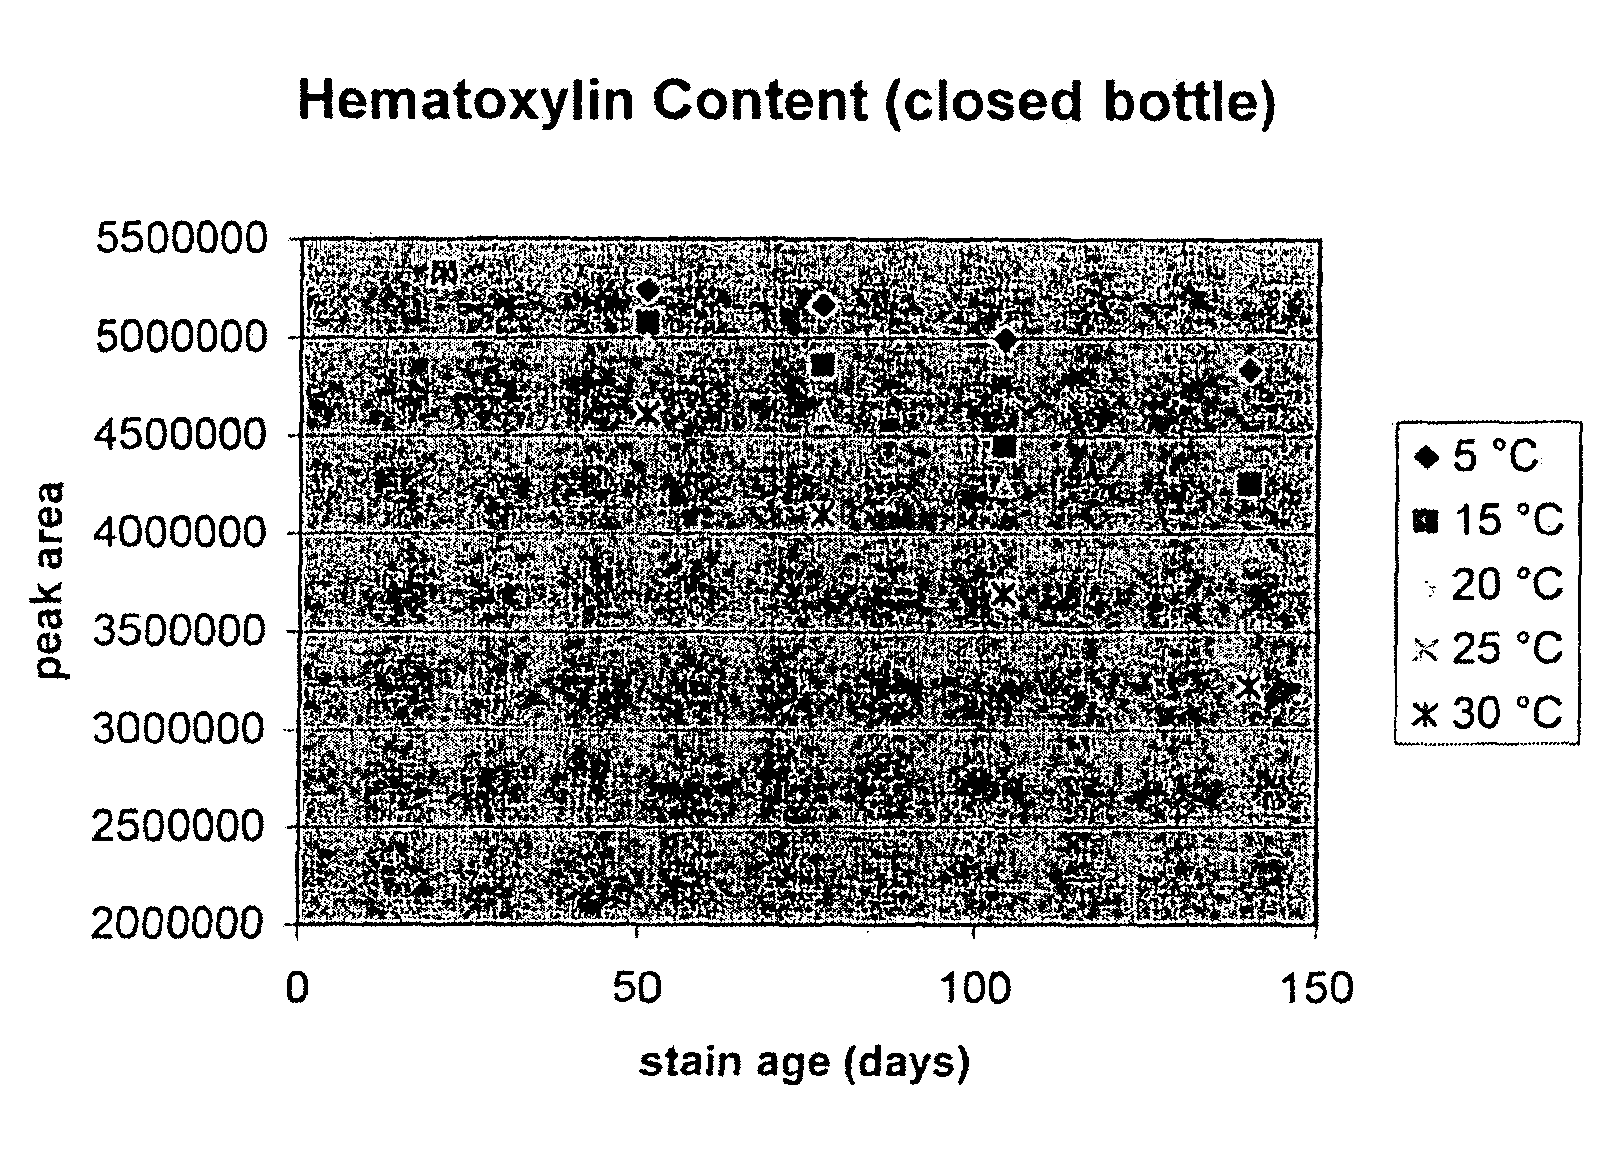 Method for improving the shelf-life of hematoxylin staining solutions